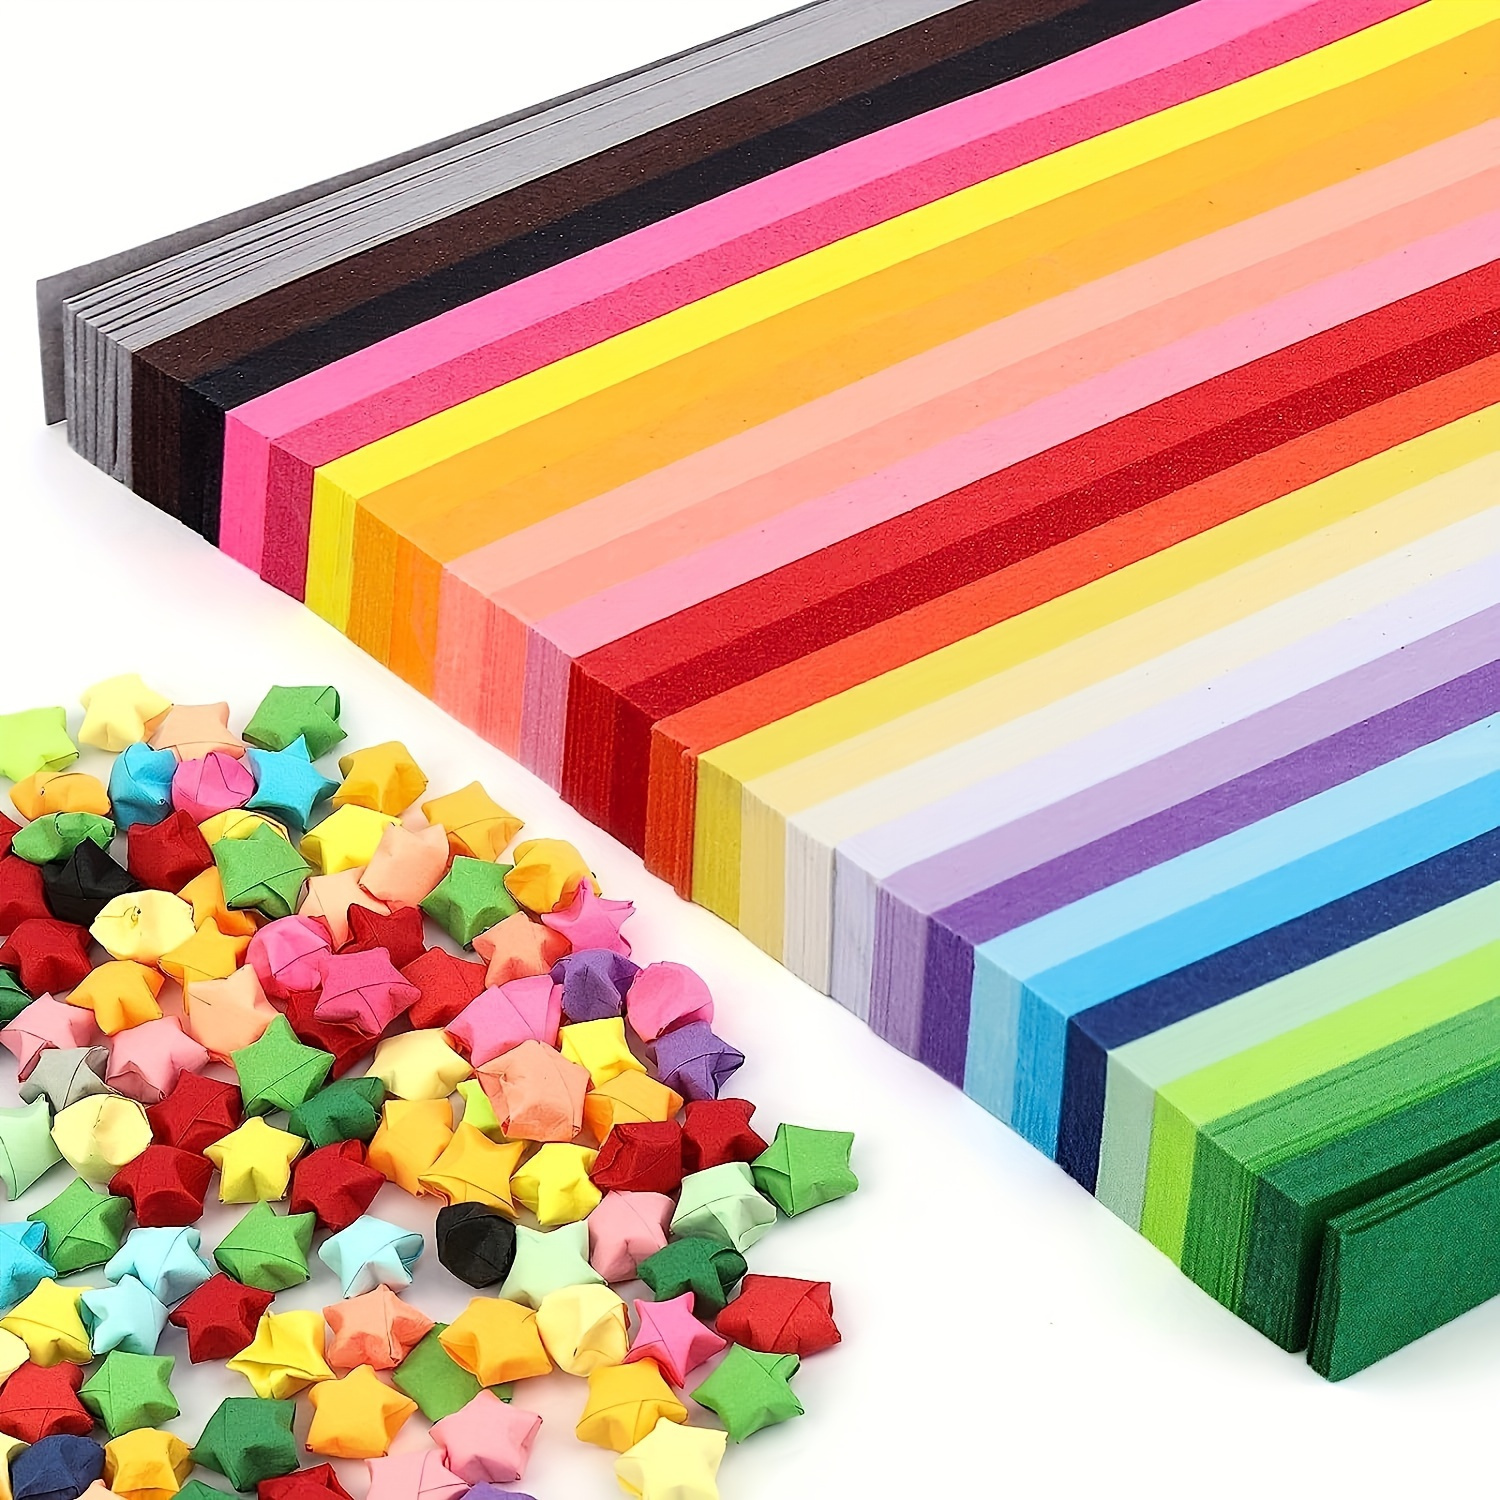  540/1350 Sheets Star Origami Paper 10 Assortment Color Origami  Star Paper, Solid Color Lucky Star Decoration Paper Strips for Teacher,  Adults, DIY Paper Craft Enthusiasts (I-540 Sheets) : Arts, Crafts & Sewing